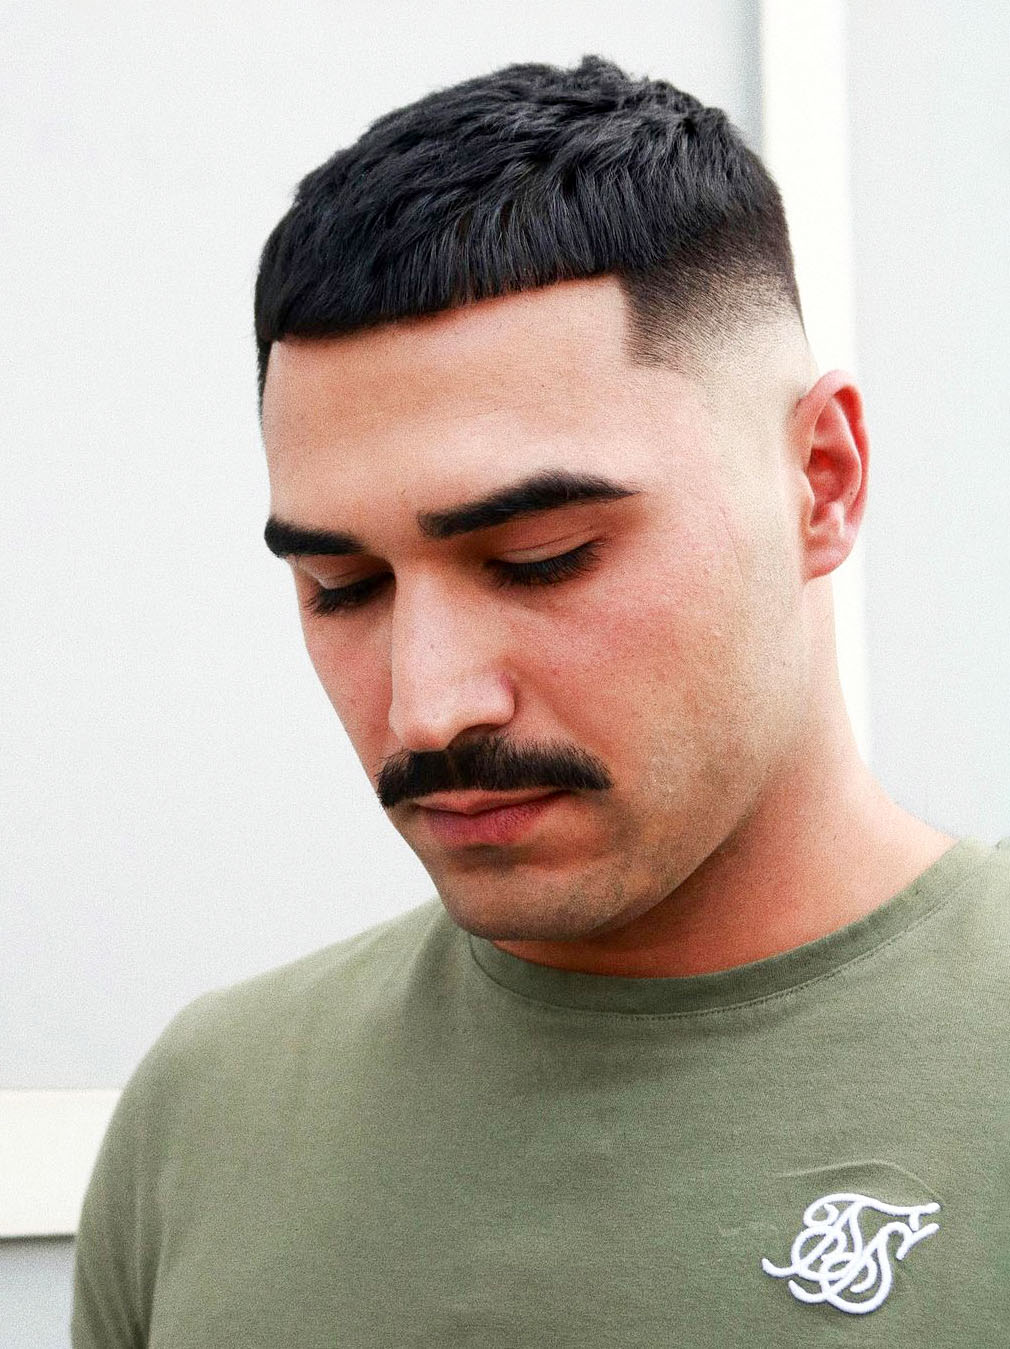 60 Most Popular Army & Military Haircuts for Men in 2022